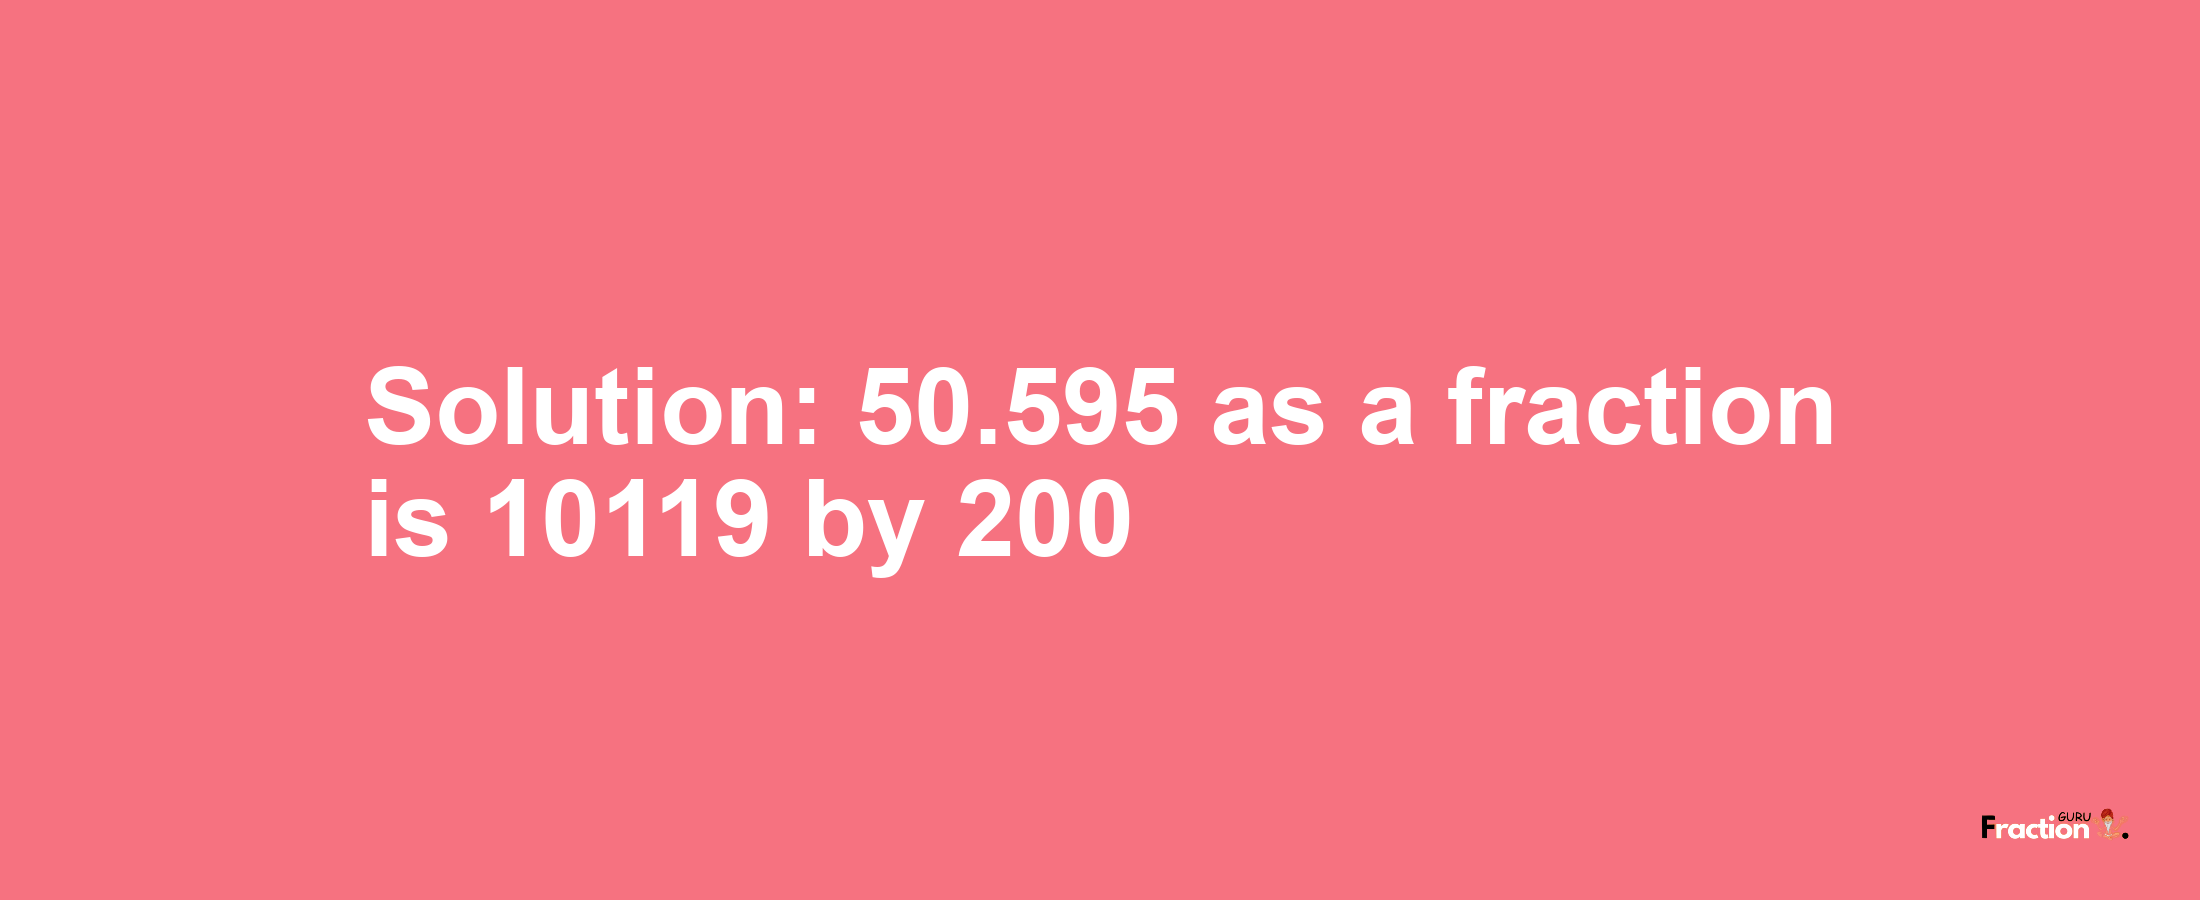 Solution:50.595 as a fraction is 10119/200